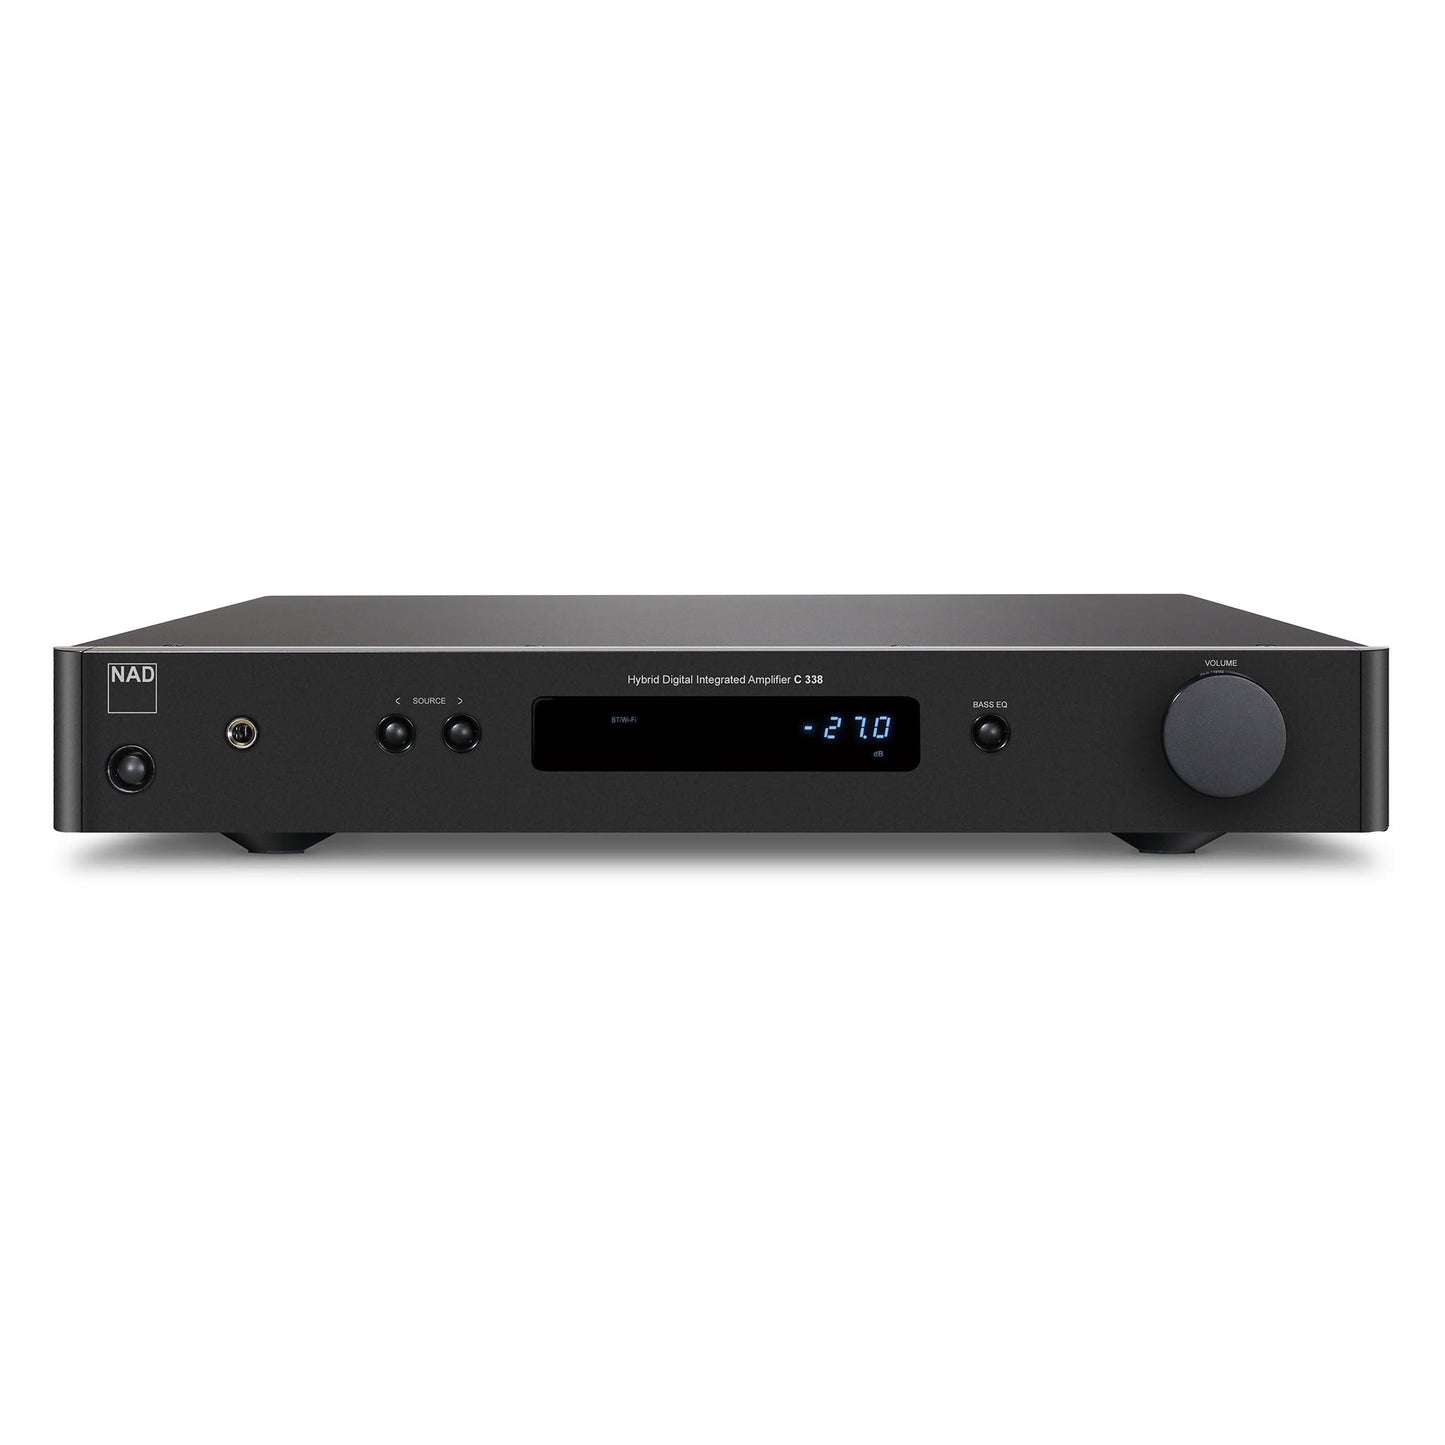 NAD C 338 Integrated Amplifier / DAC (OPEN)